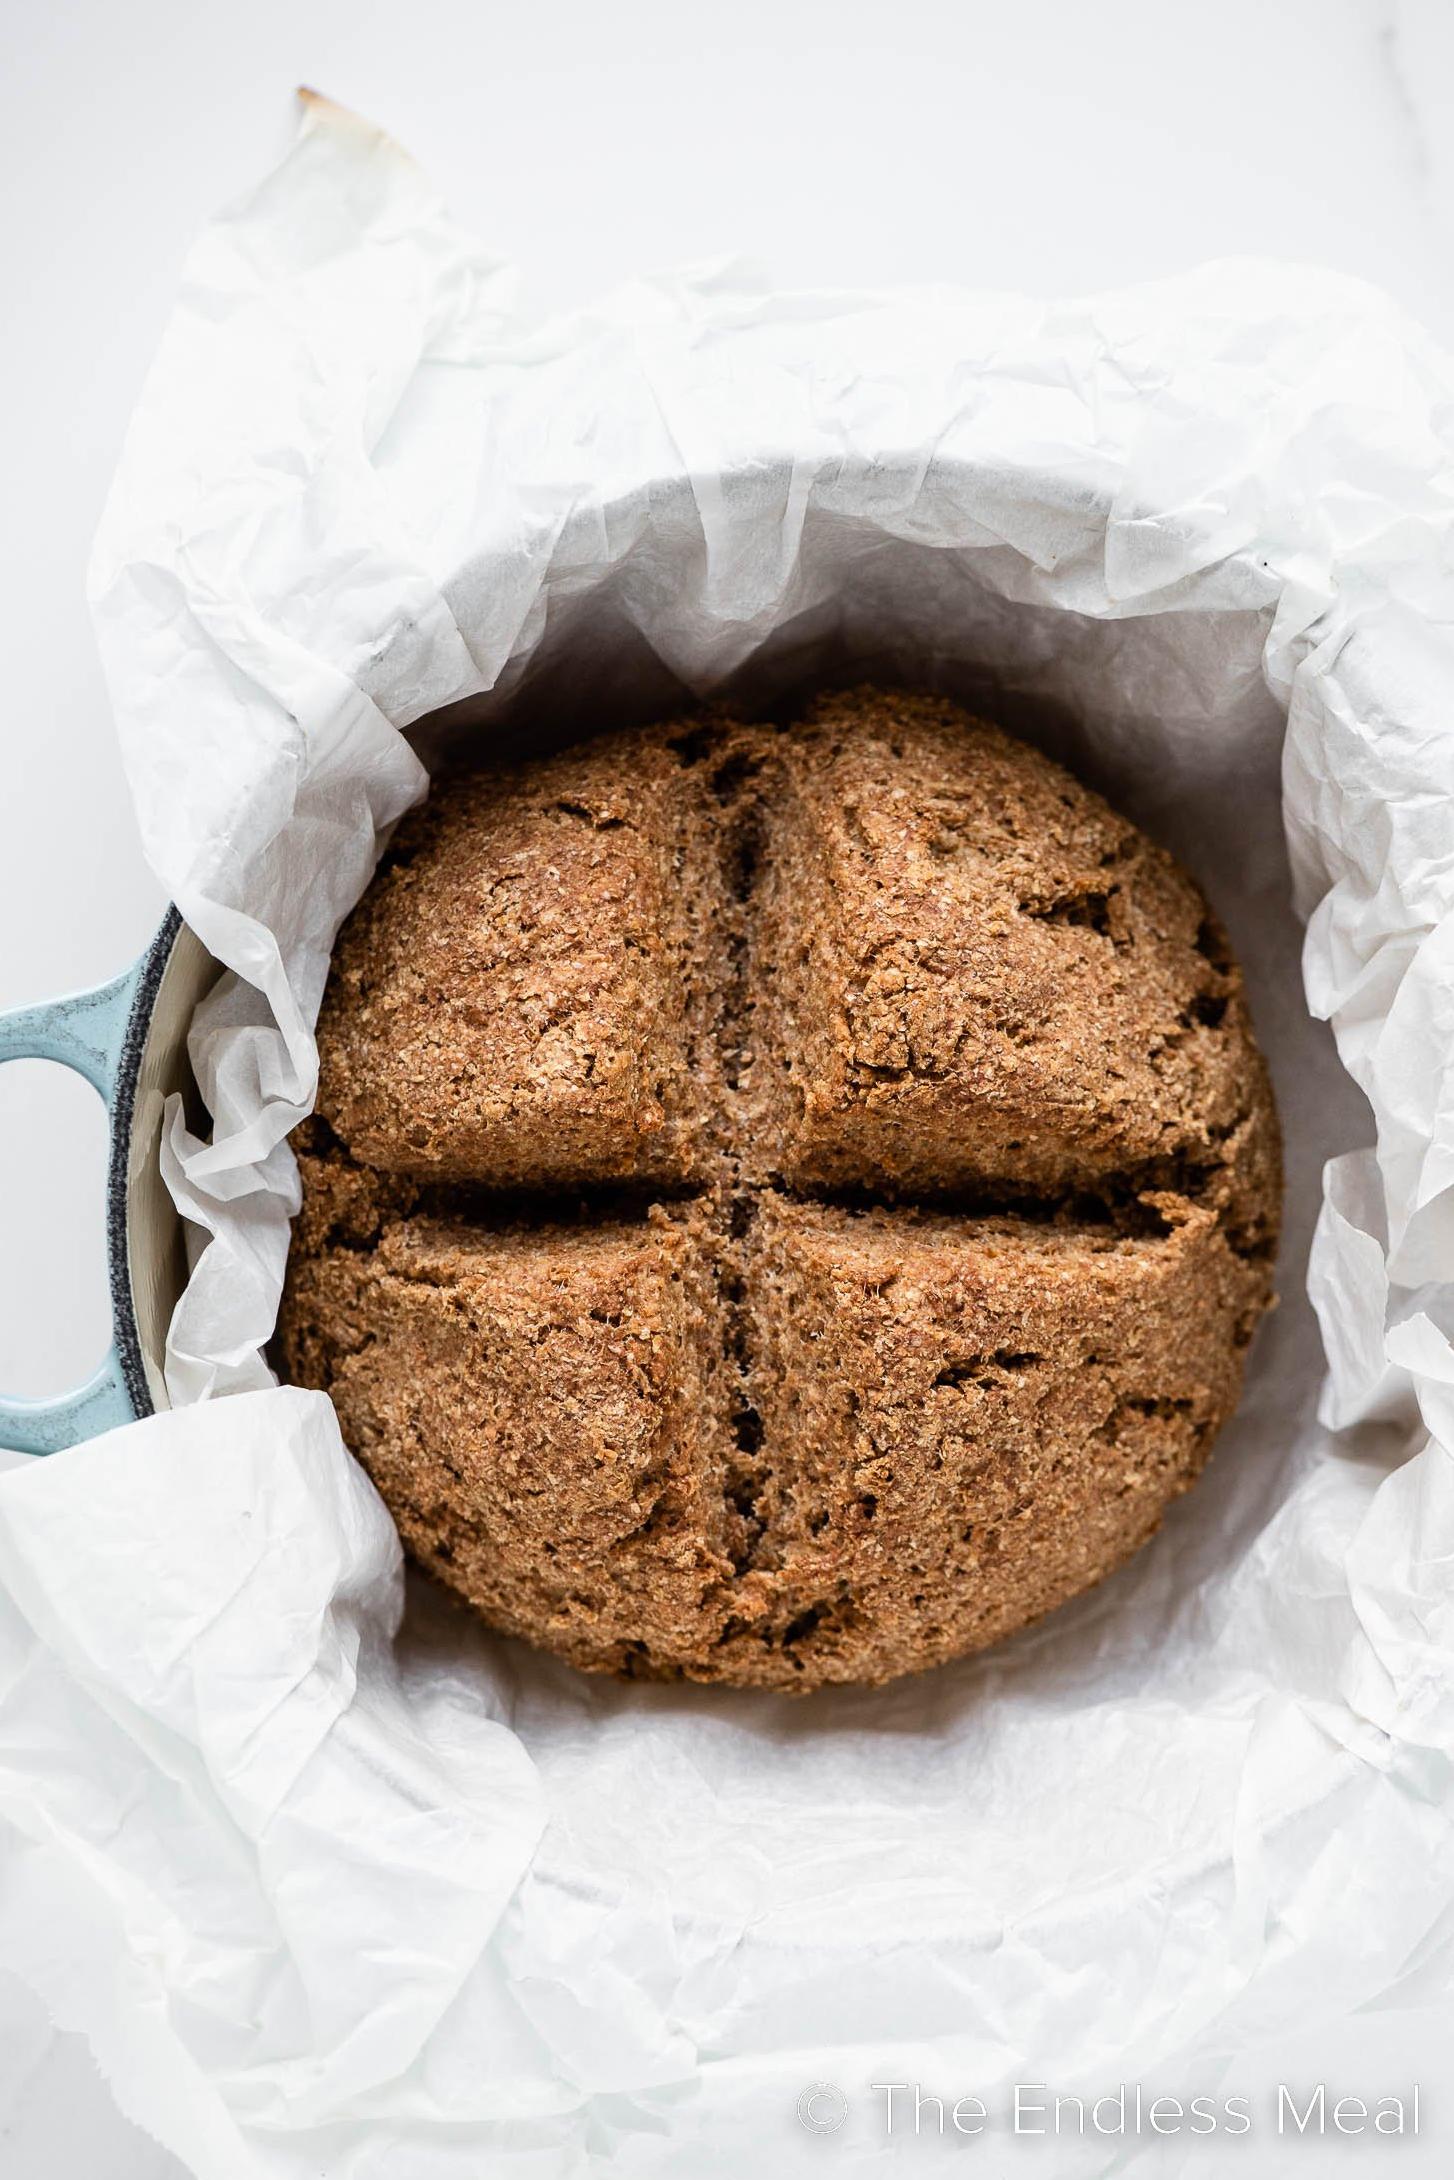  Whole wheat flour gives the bread a nutty flavor and hearty texture